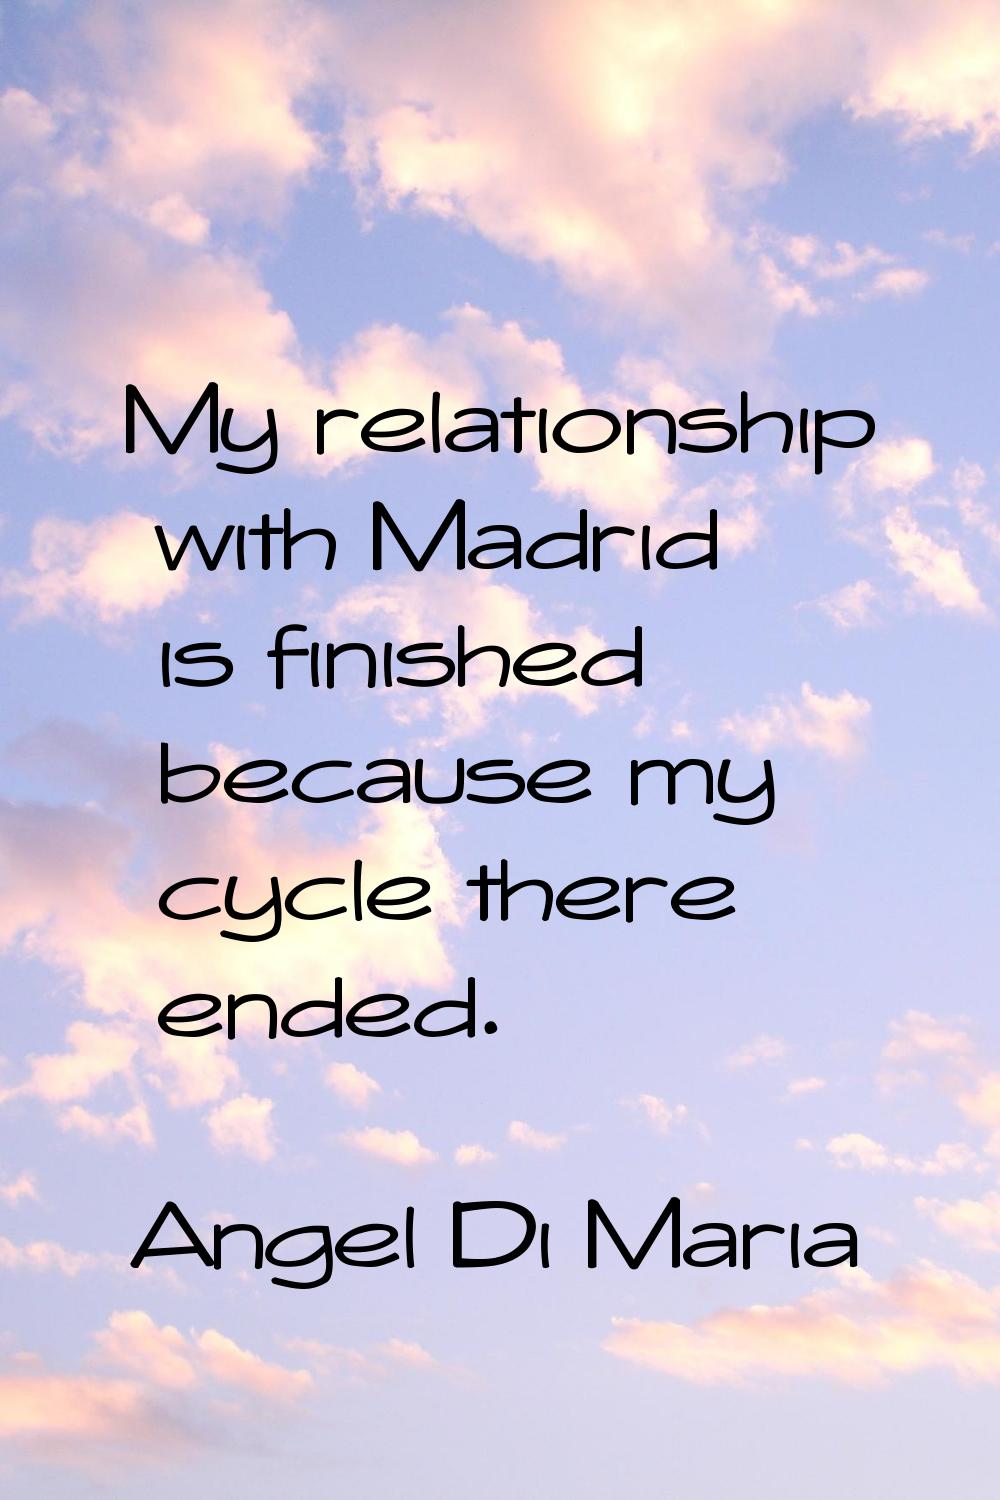 My relationship with Madrid is finished because my cycle there ended.